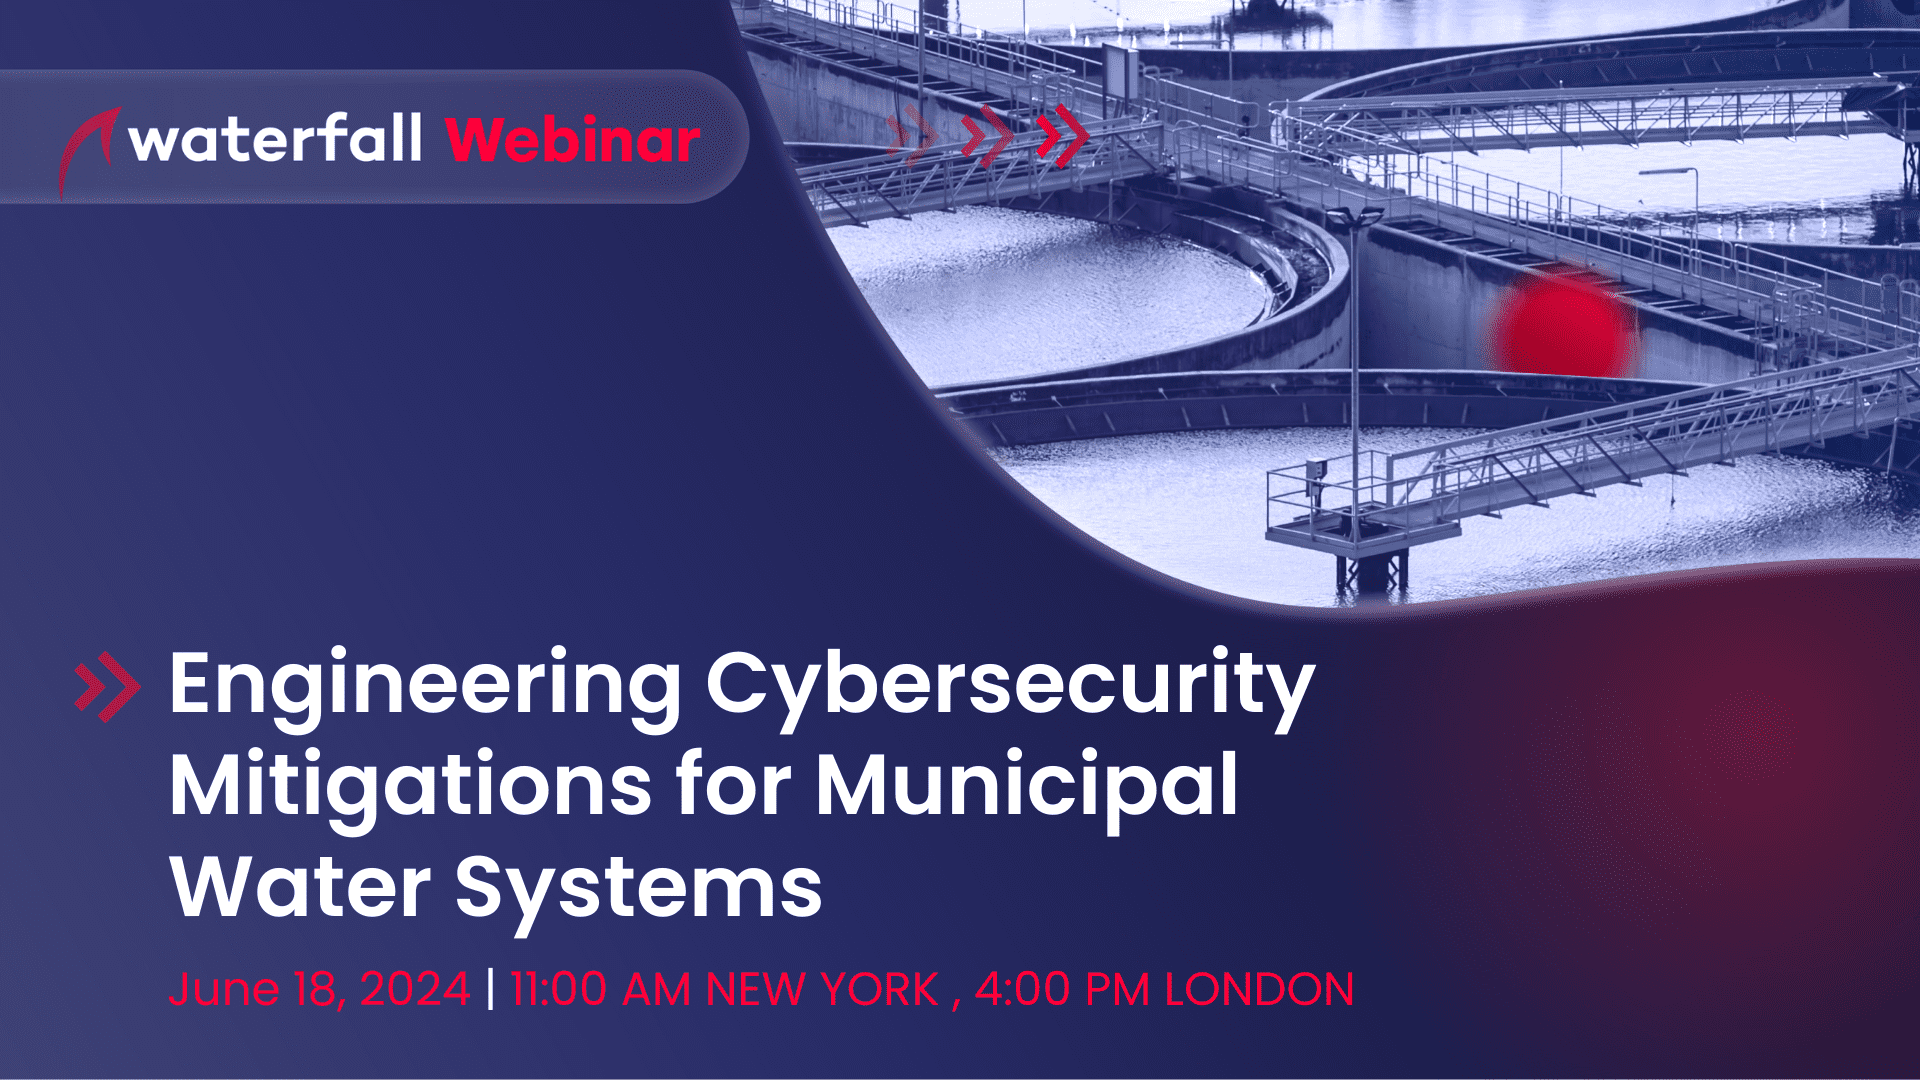 Engineering Cybersecurity Mitigations for Municipal Water Systems webinar